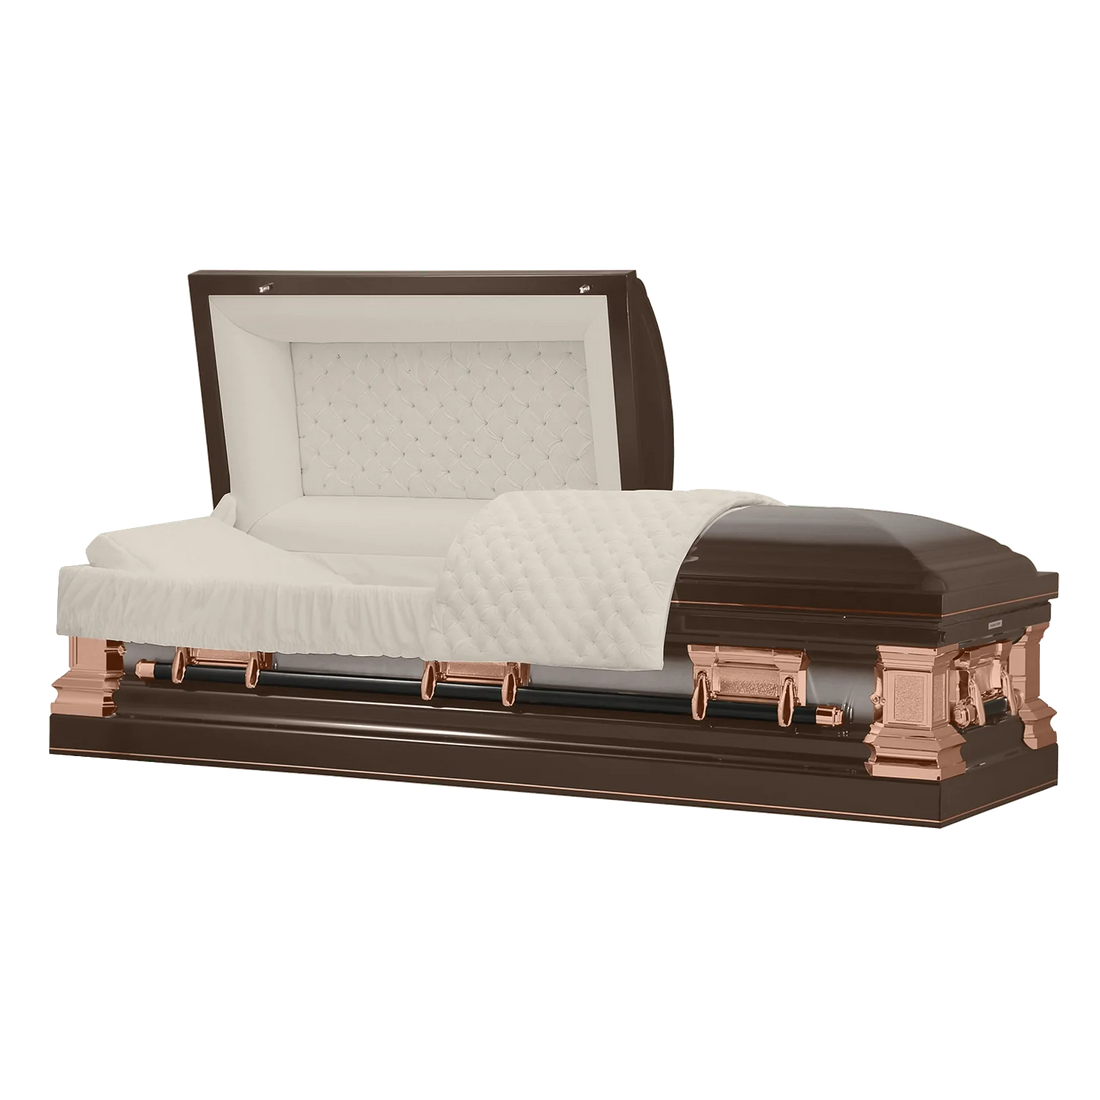 When and How to Buy a Bronze Color Casket